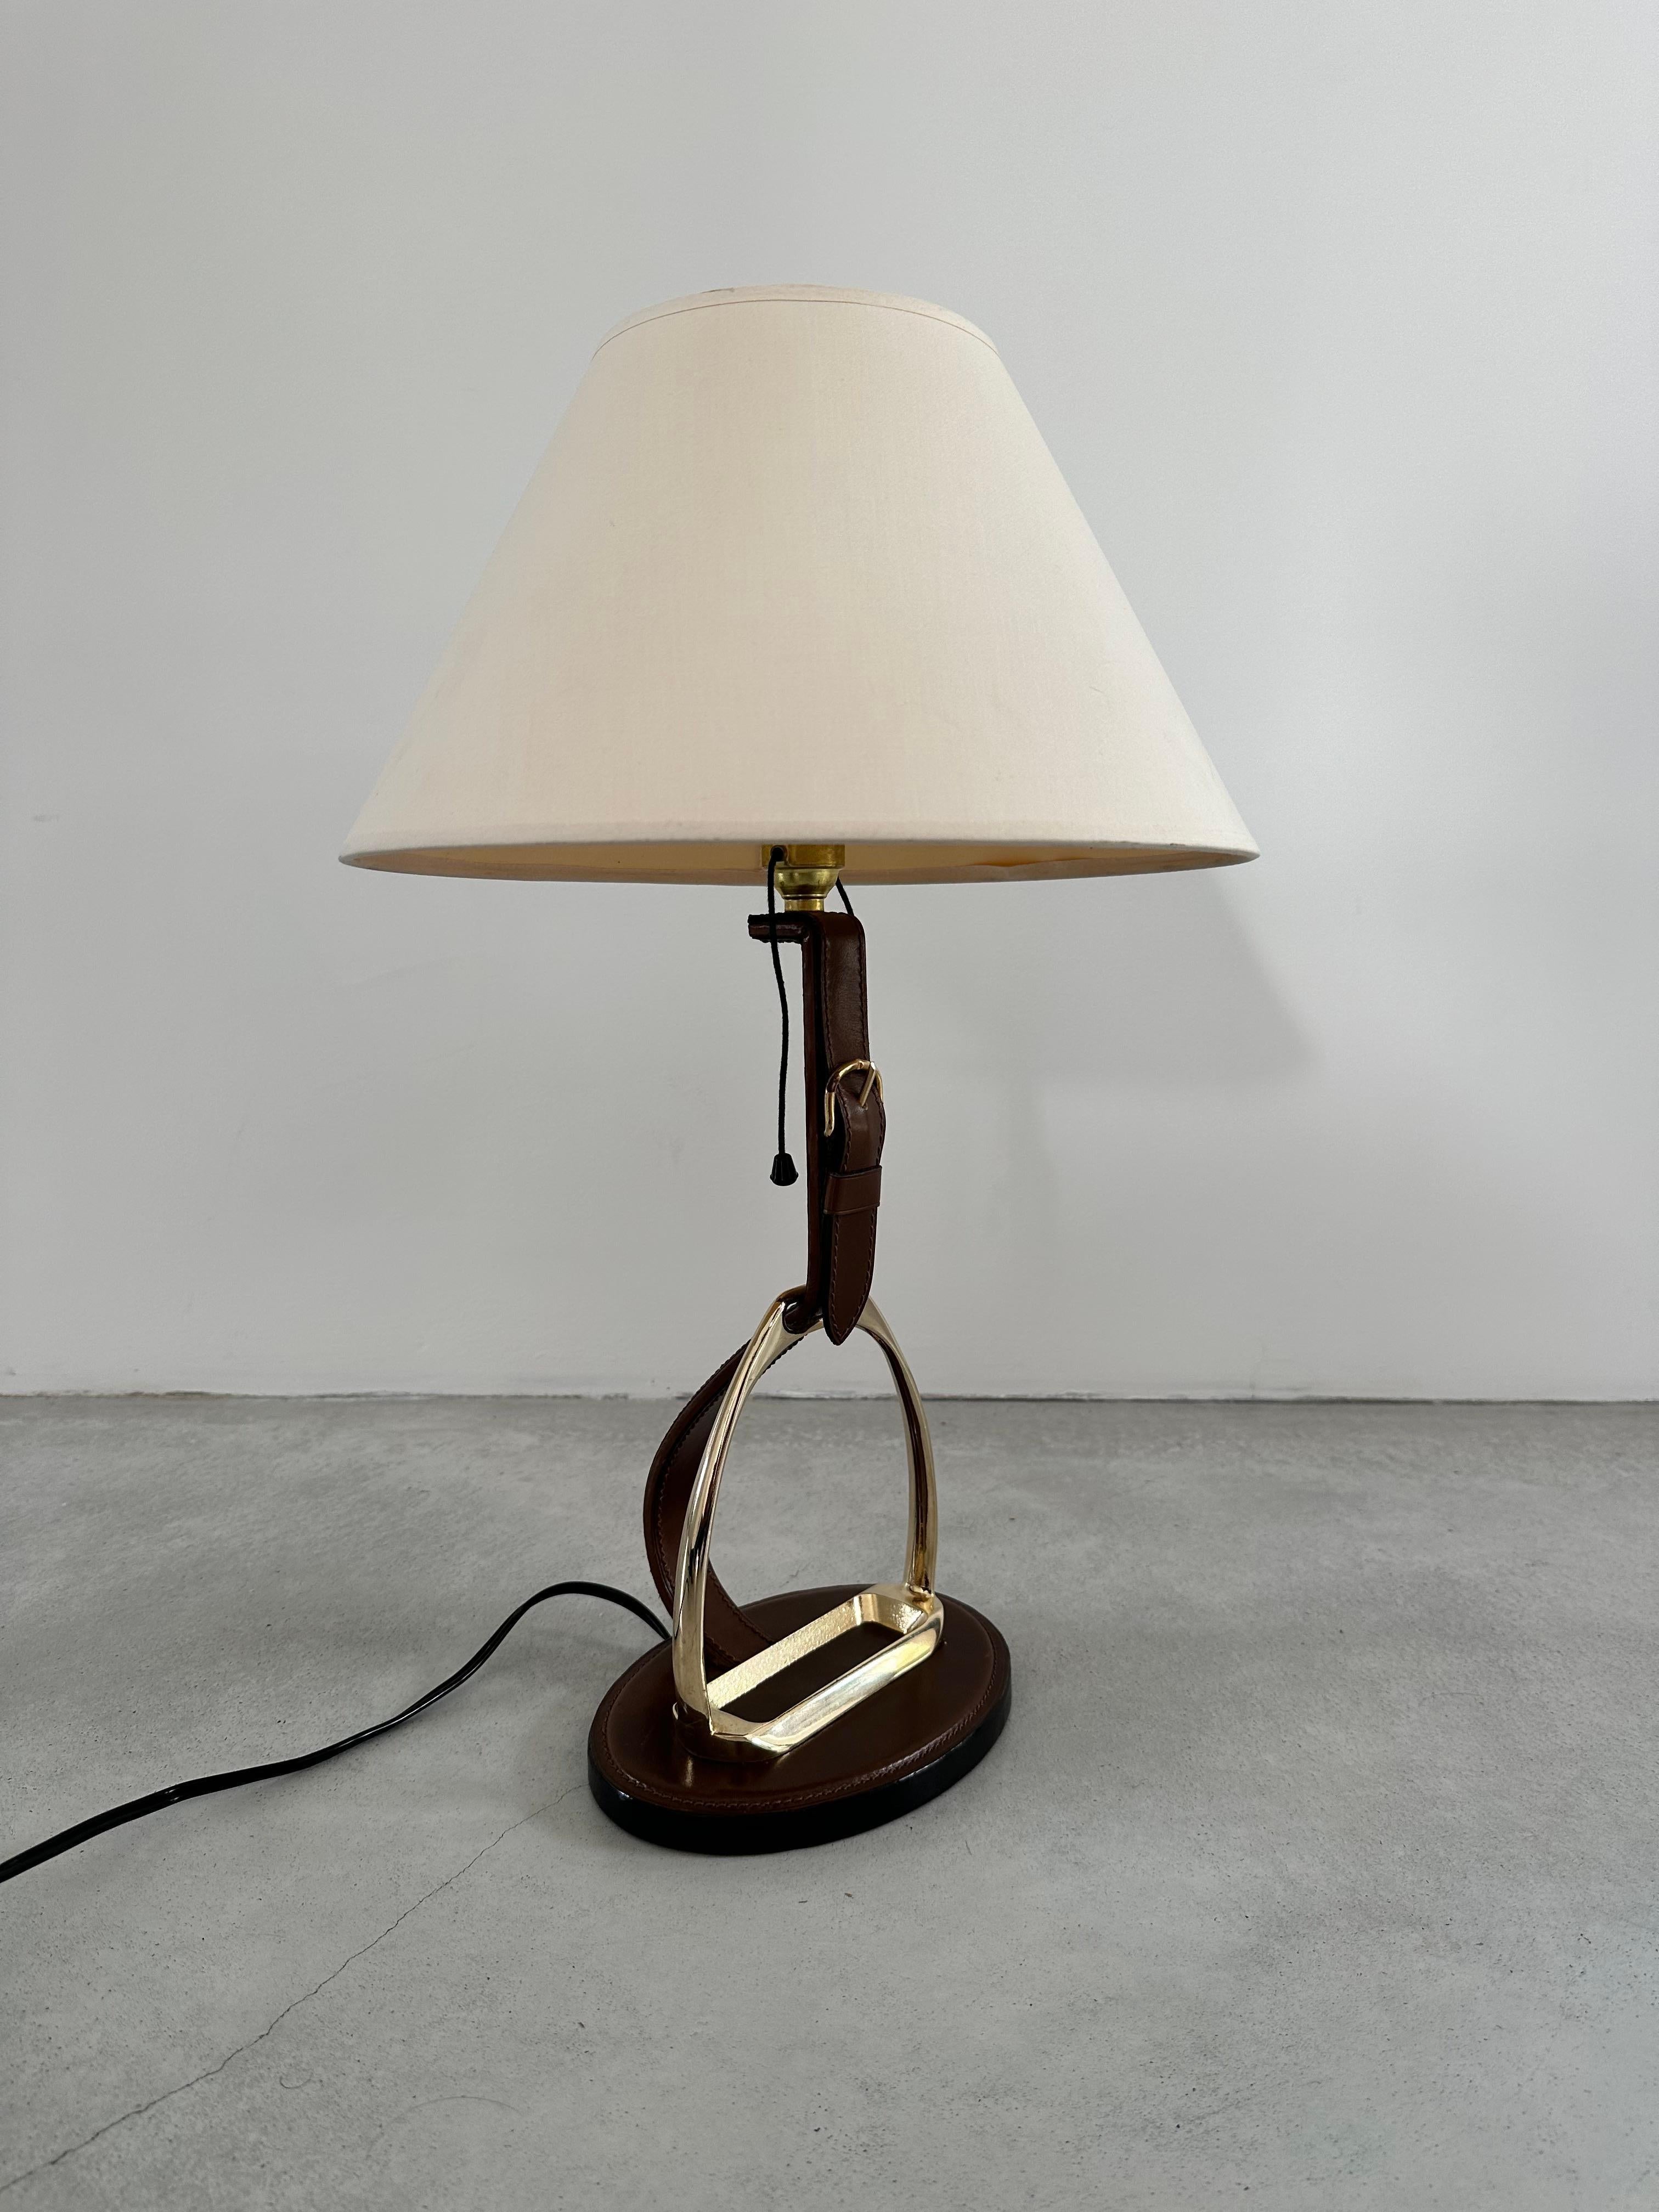 A thoroughbred French 1960's lamp, design by Longchamp Paris 
for your writing table. 

A solid brass stirrup mounted and wrapped in saddle-stitched leather with brass buckle. Very 

The Longchamp table lamp brings elegance and sophistication to